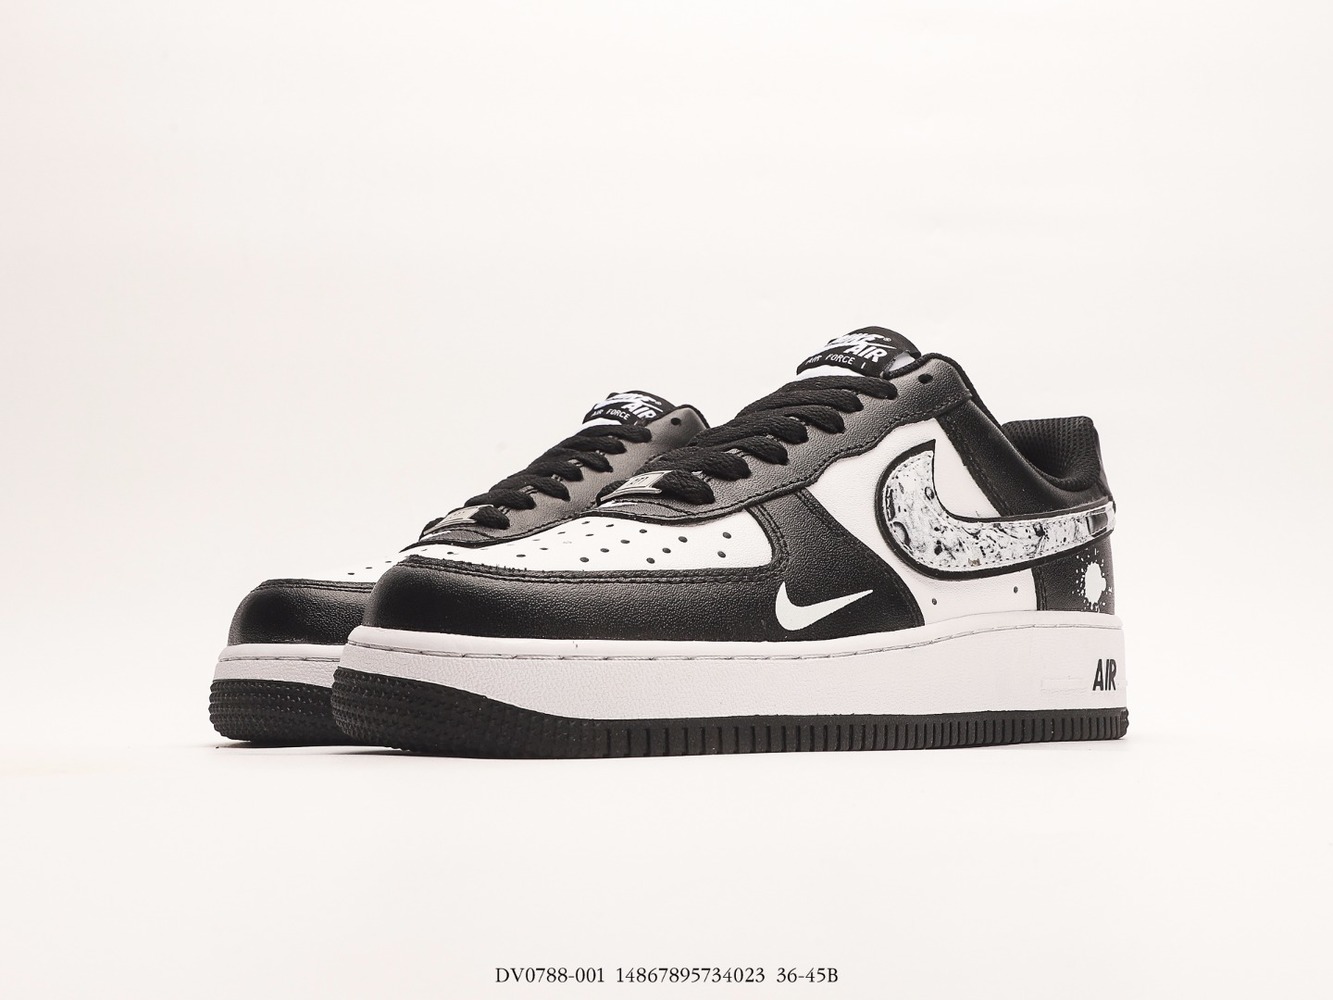 Nike Air Force 1 Low Force 1 _DV0788-001